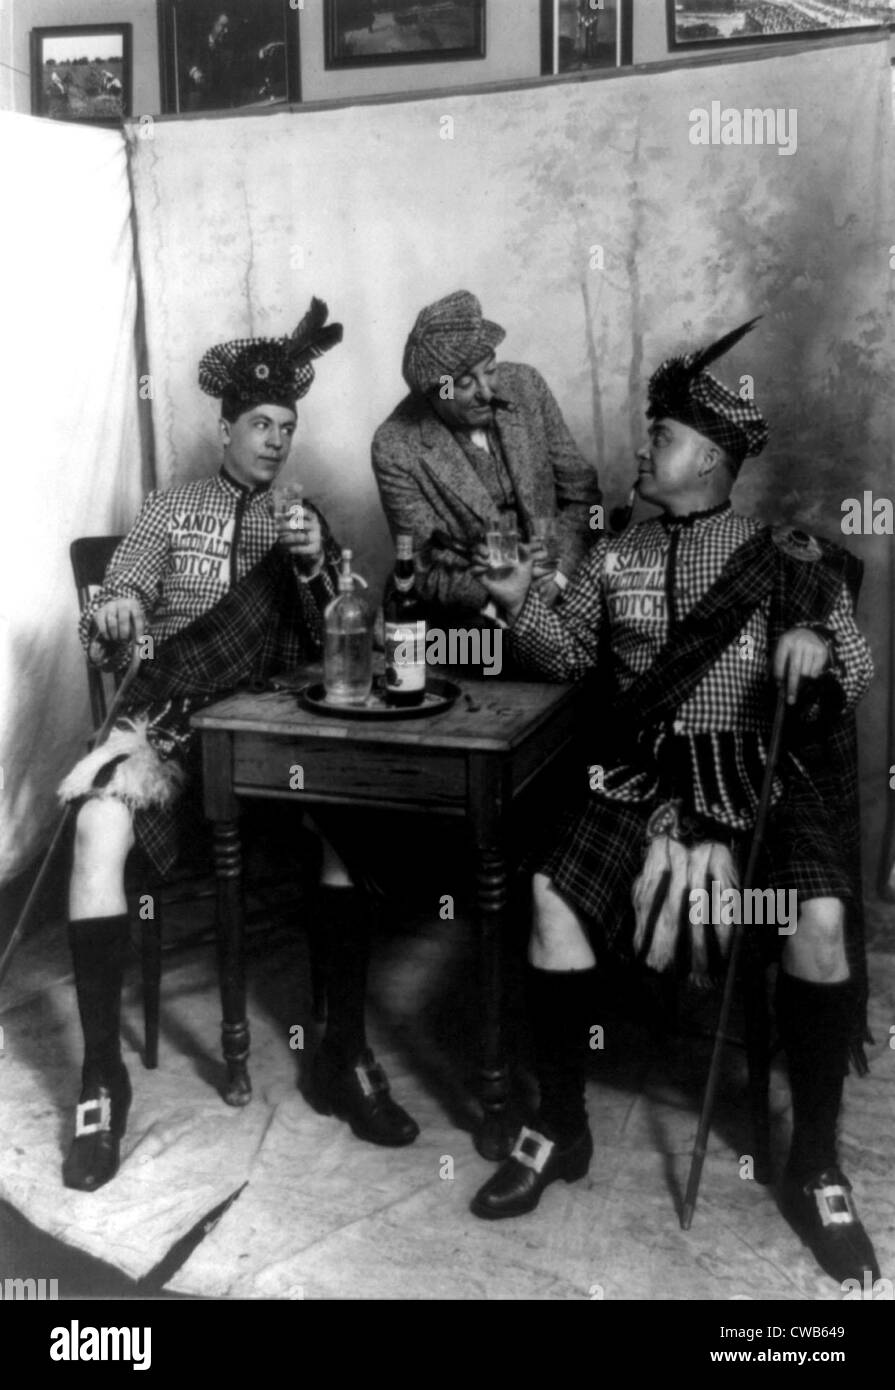 Two men wearing kilts seated at small table, drinking Sandy MacDonald scotch, with man standing and leaning against the table, Stock Photo